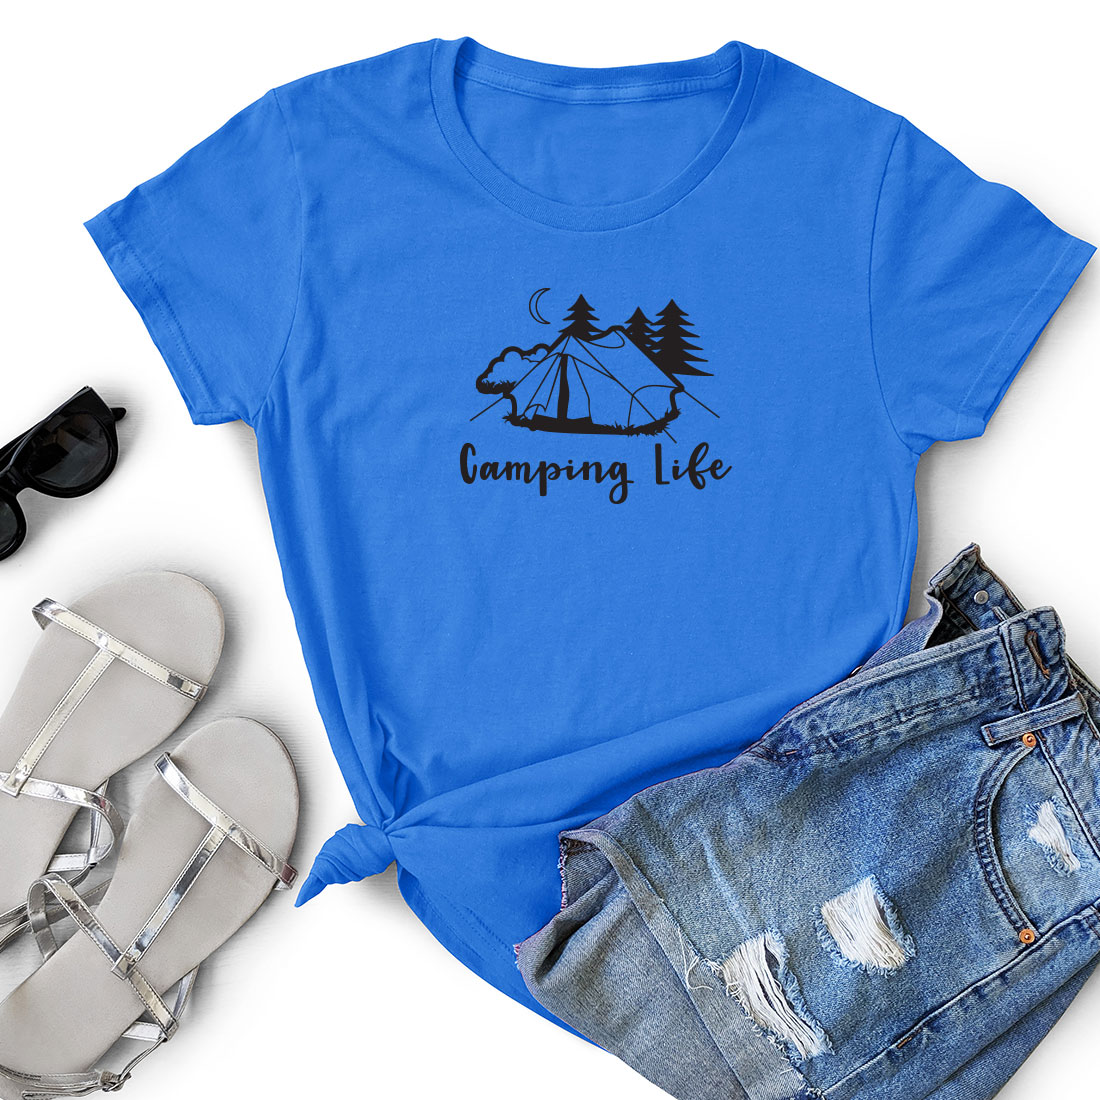 Blue shirt that says camping life next to a pair of shorts.